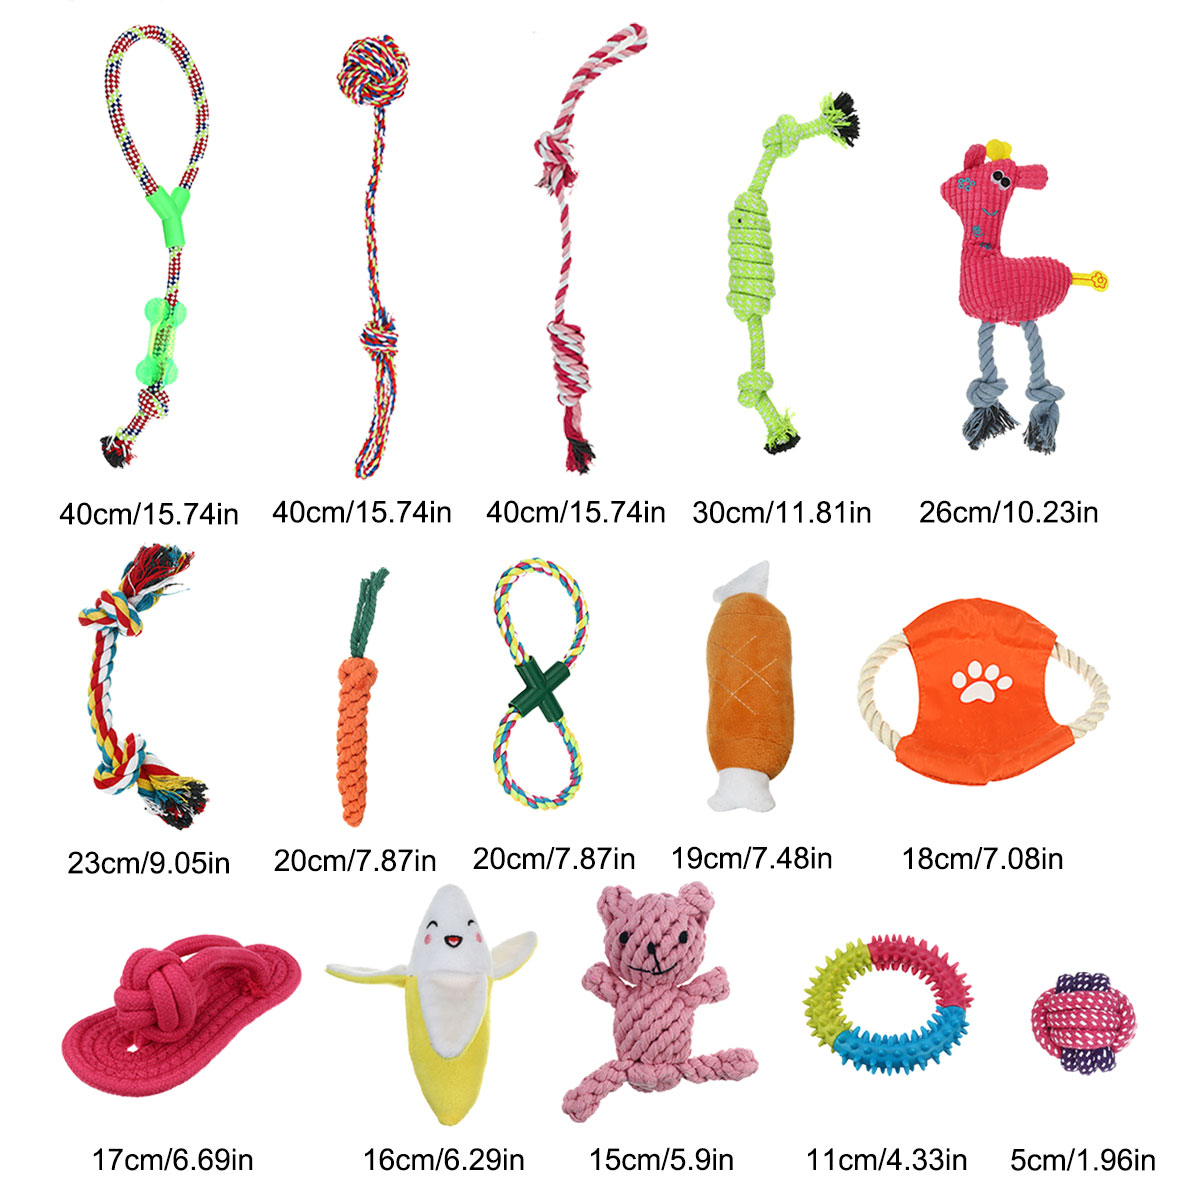 12x-Assorted-Dog-Puppy-Pet-Toys-Ropes-Chew-Ball-Knot-Training-Play-Bundle-Cotton-1953112-2